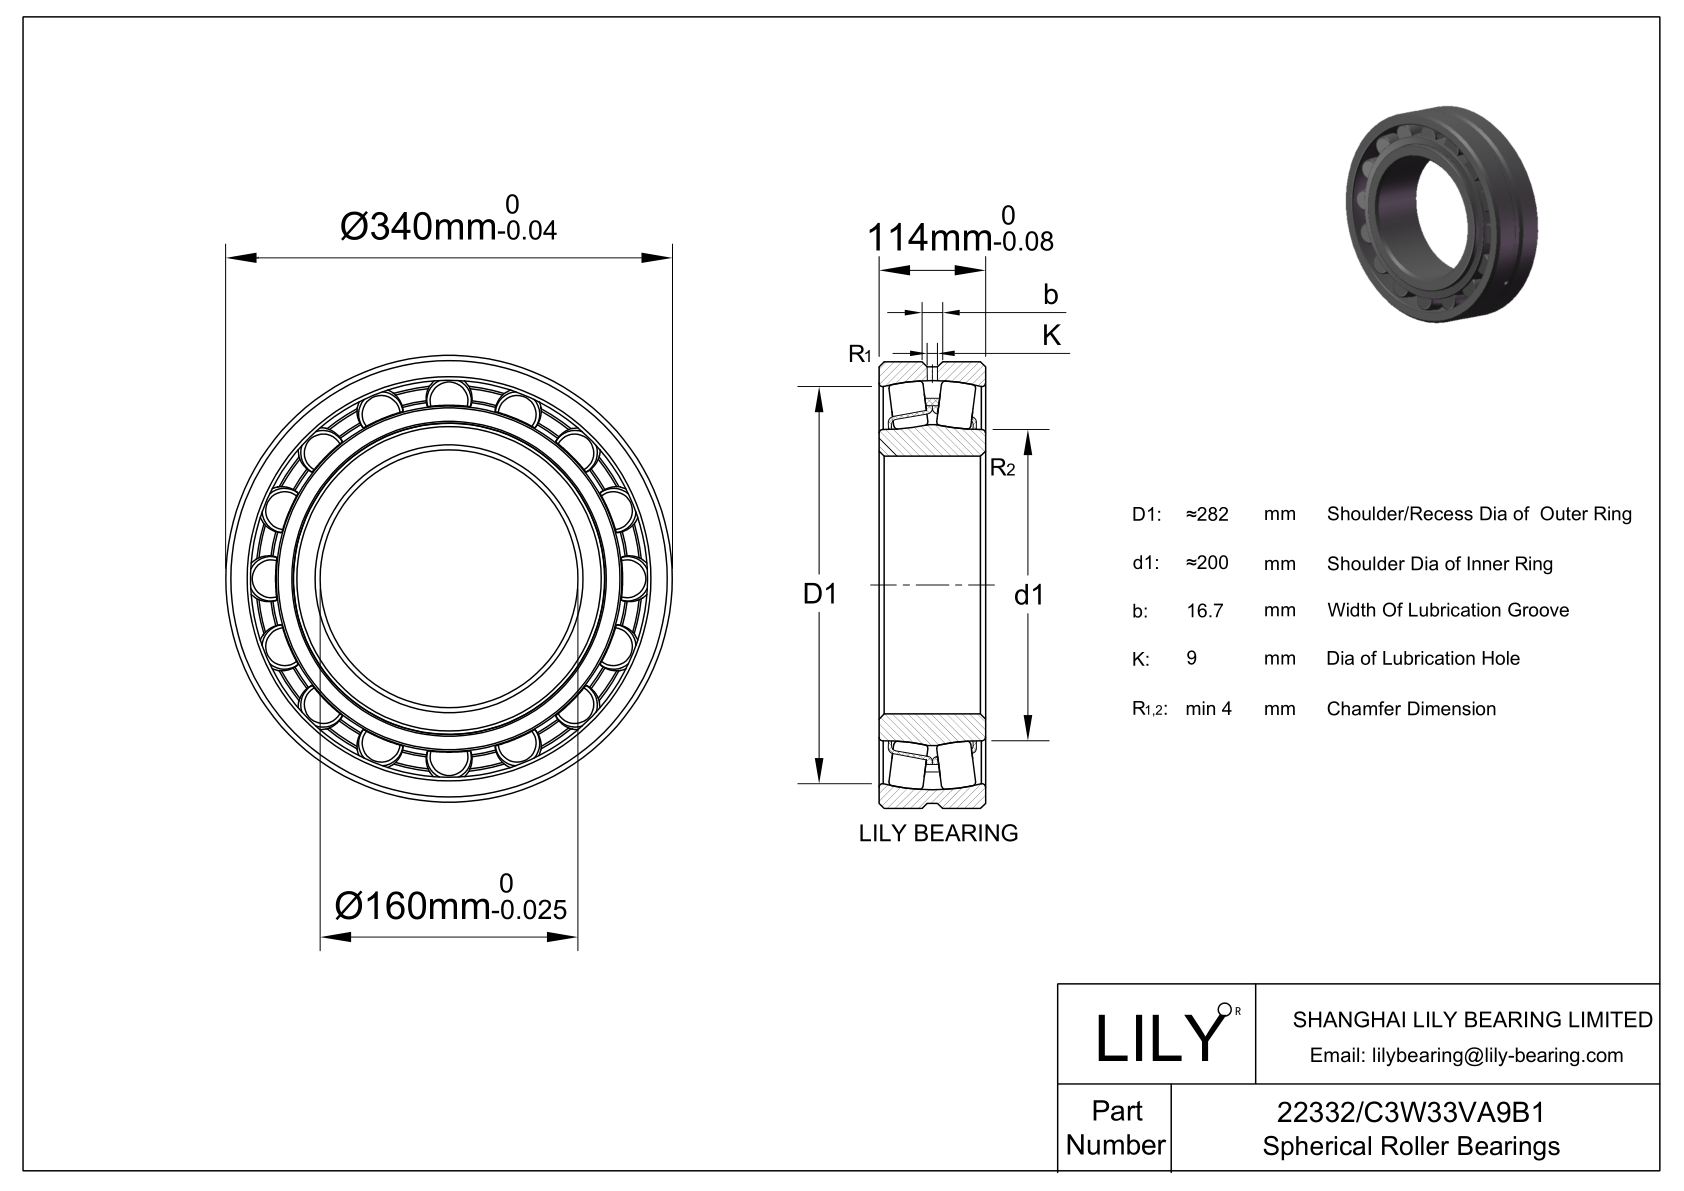 22332/C3W33VA9B1 Double Row Spherical Roller Bearing cad drawing